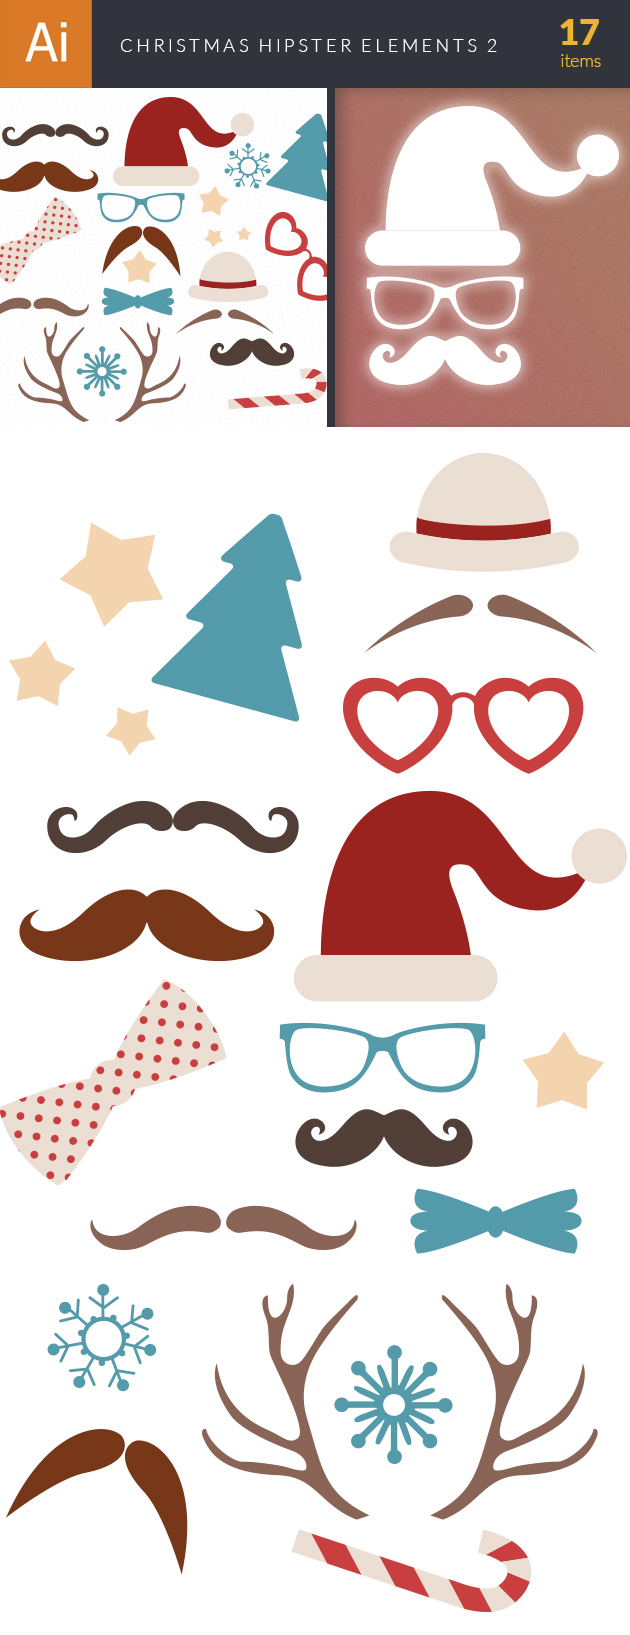 Christmas Hipster Elements Vector Set 2 2